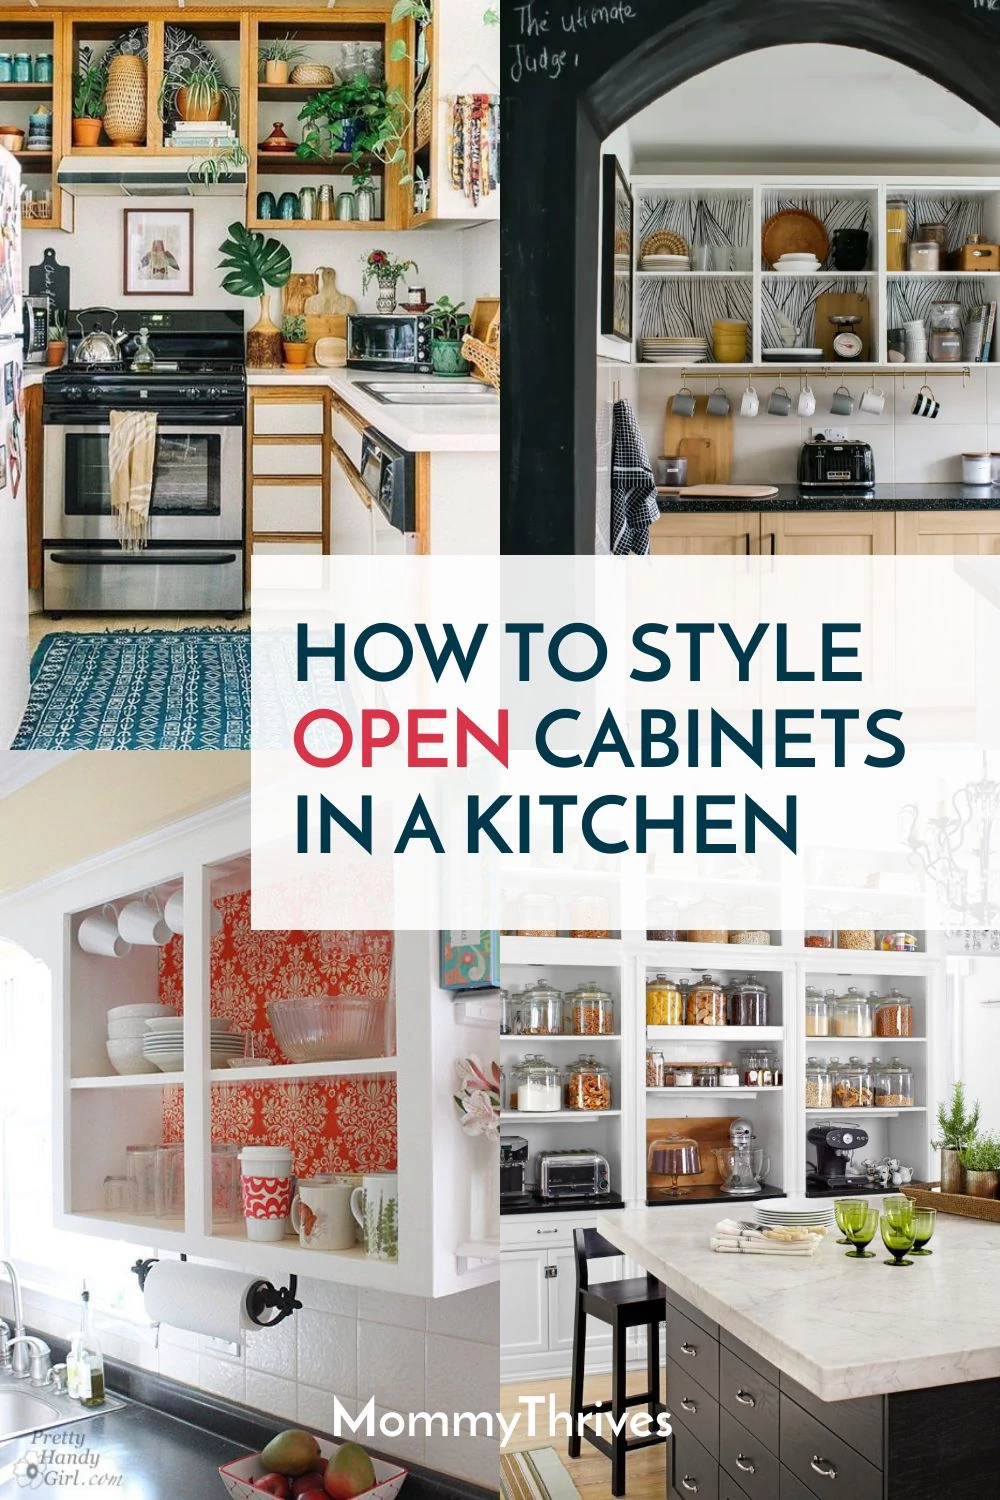 How To Style Open Cabinets - Kitchen Open Cabinets Ideas - Kitchen Decor Open Cabinets